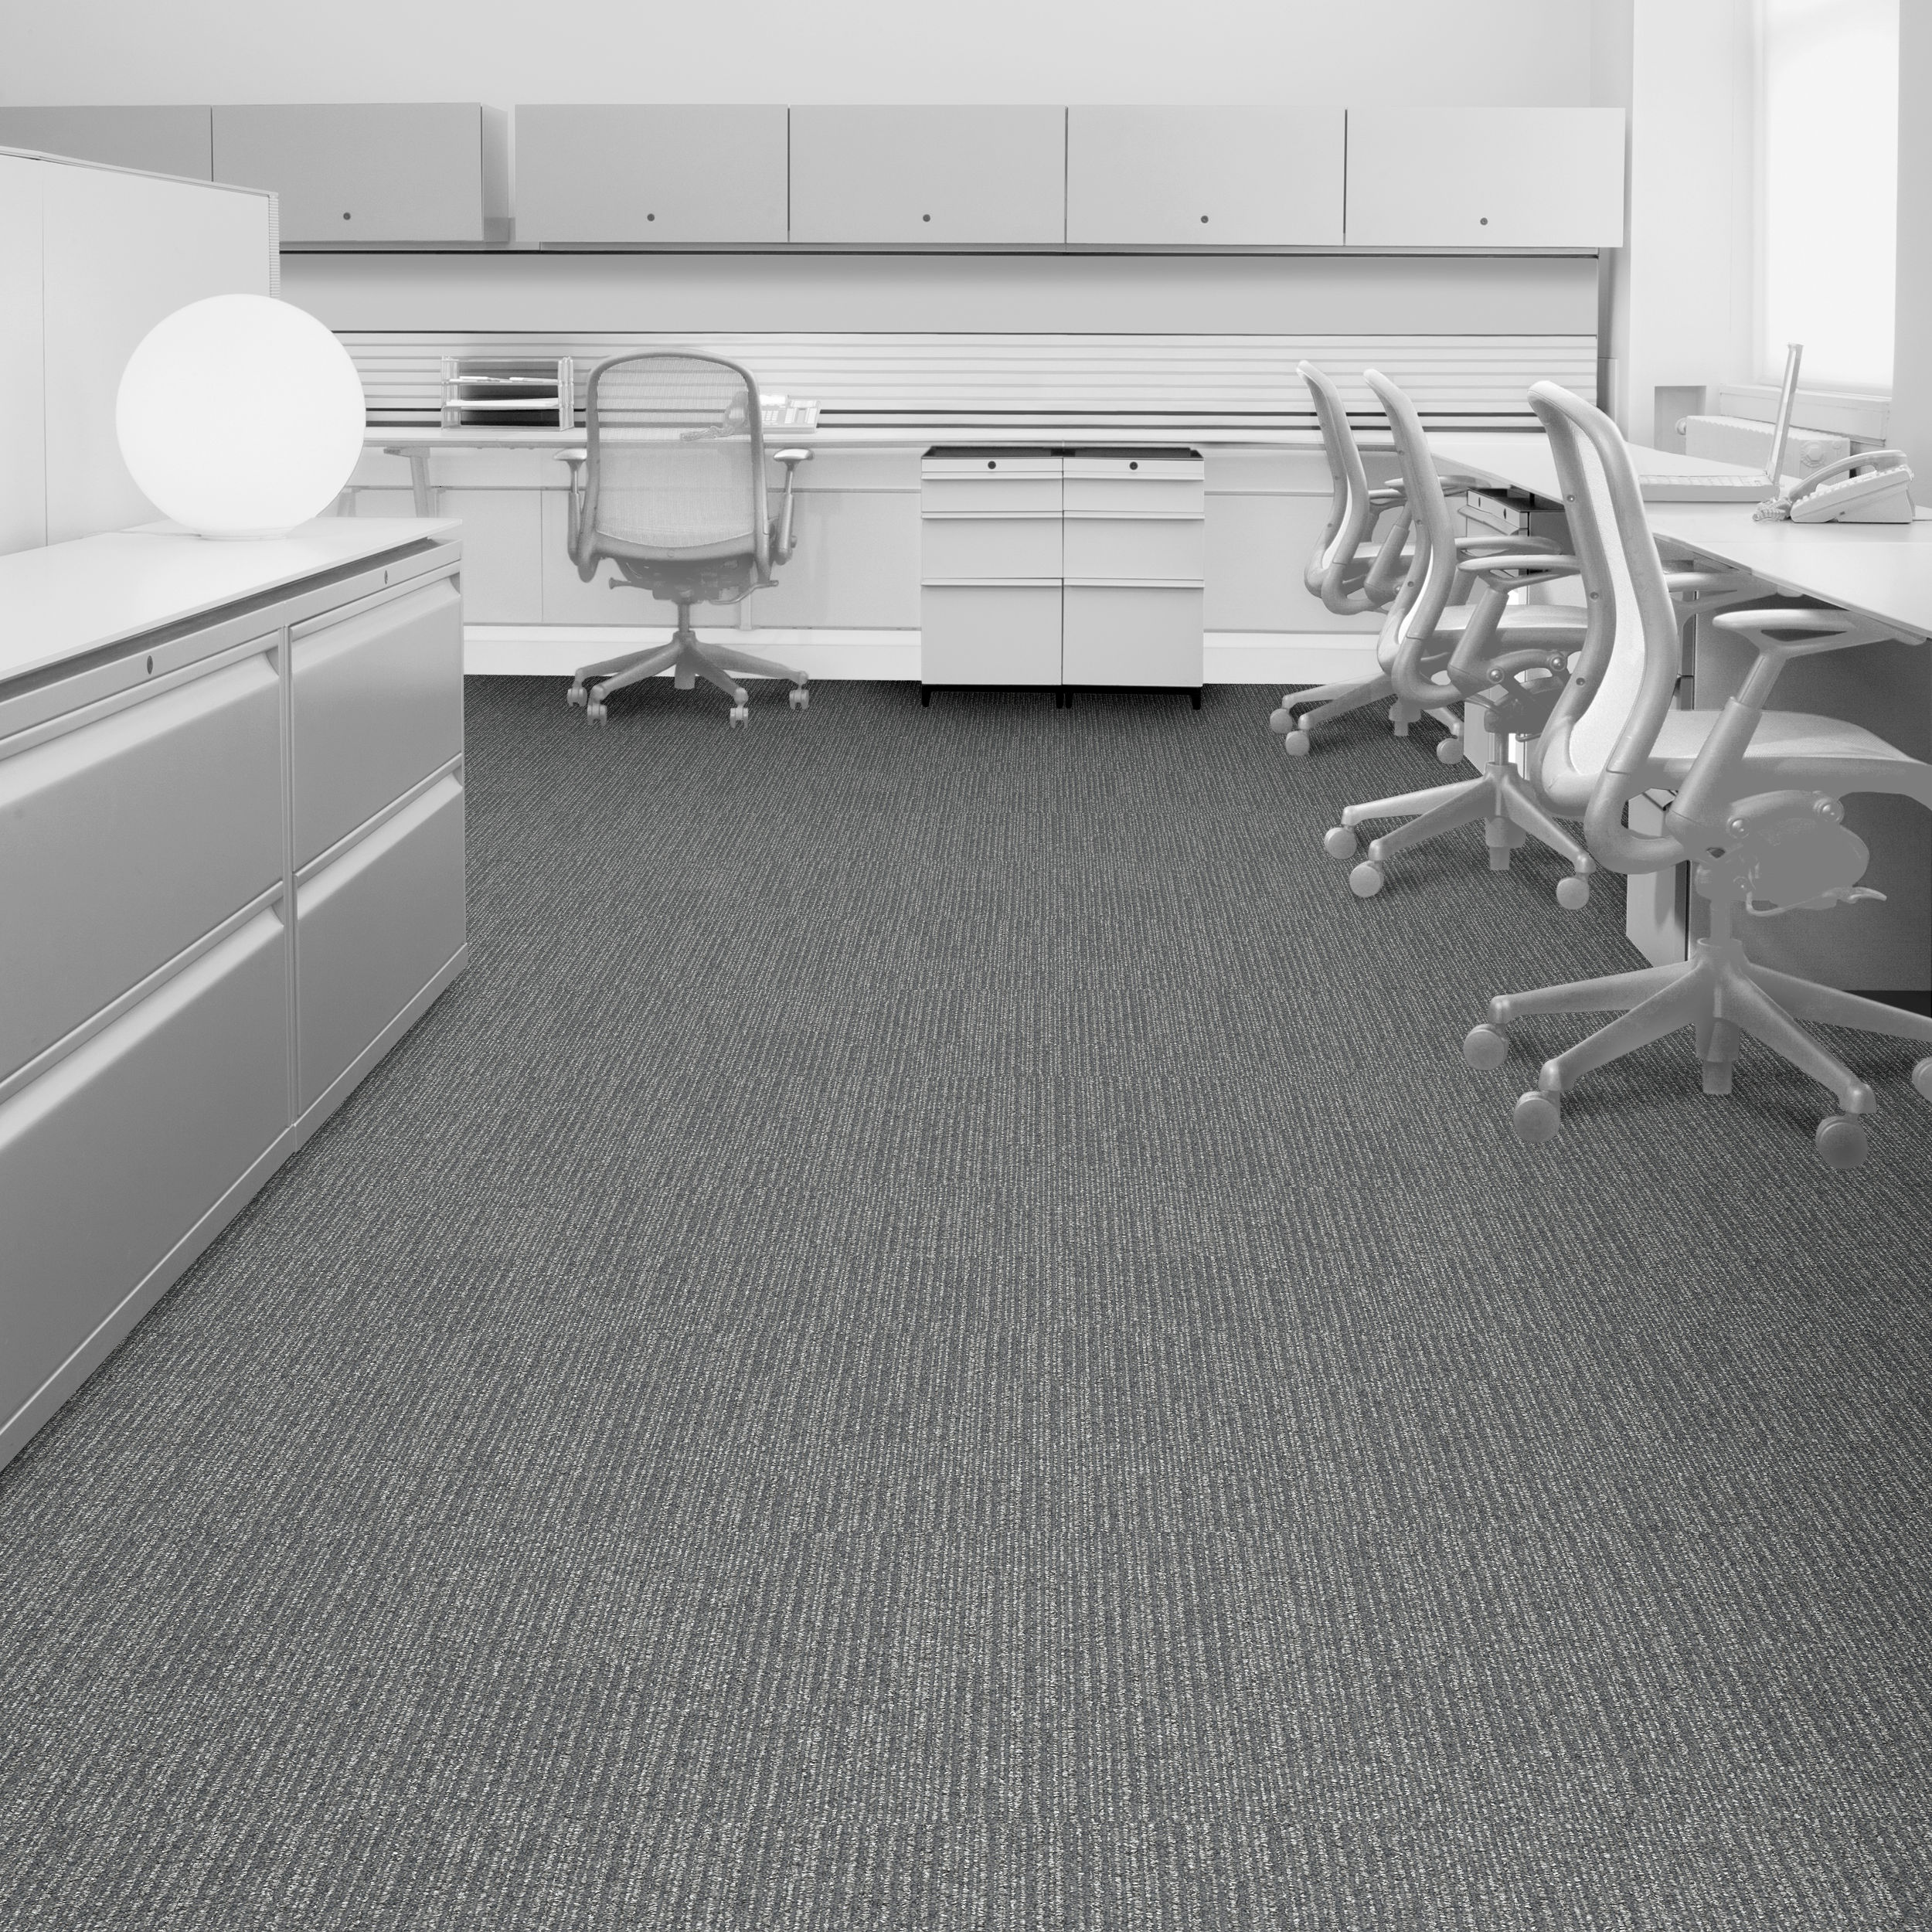 Interface Equilibrium Symmetry Carpet Tile in office setting.